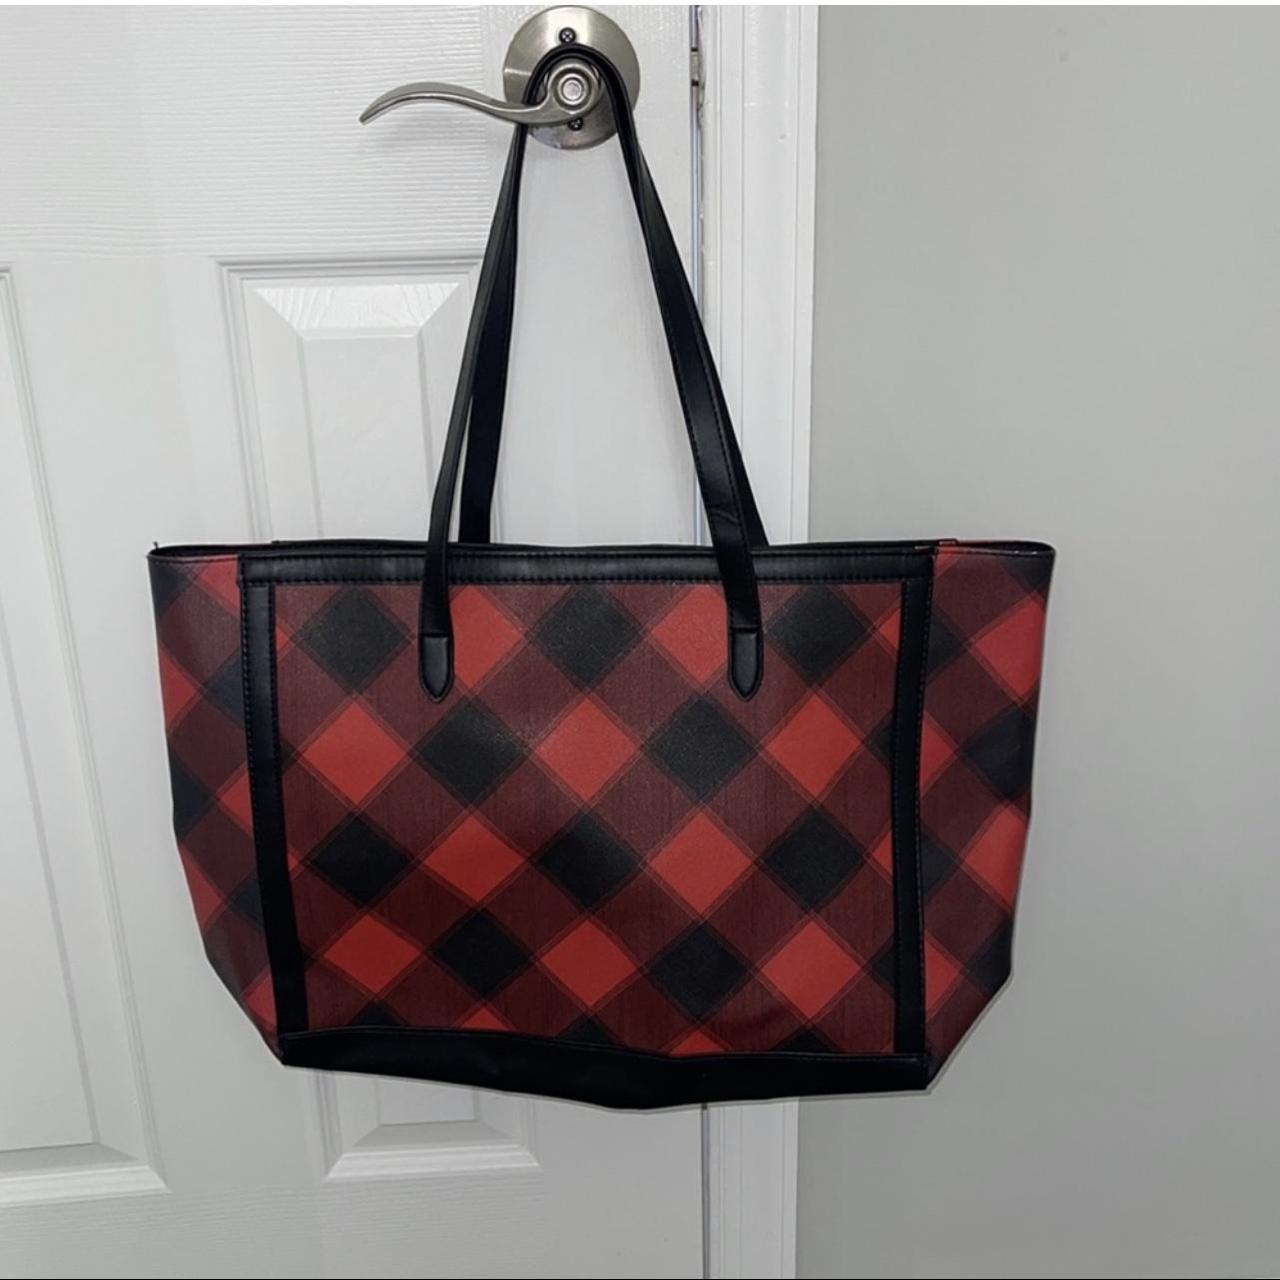 Red and Black Plaid Victoria’s Secret Tote Bag, This